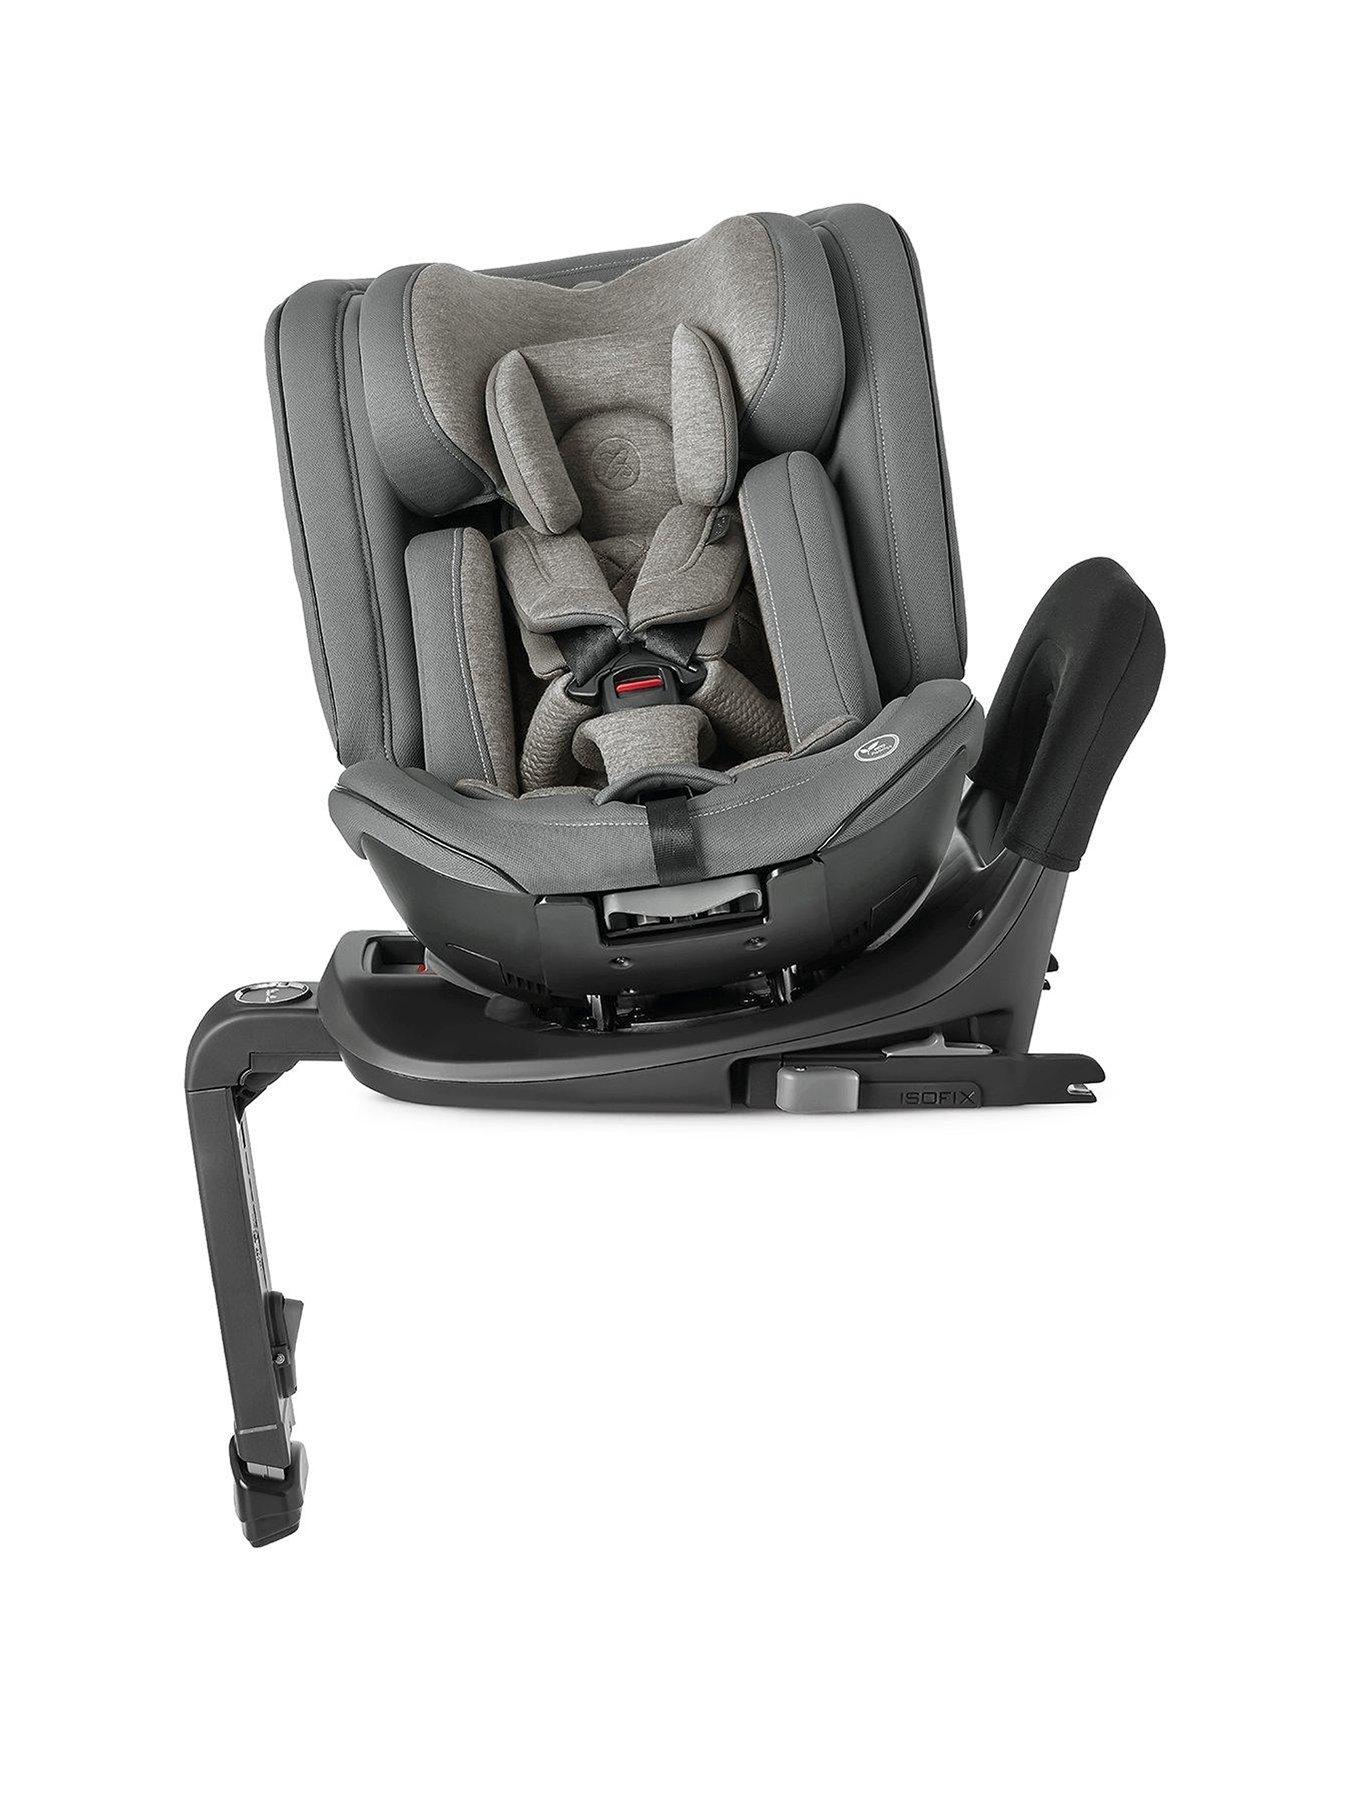 Joie spin 360™ GT  Group 0+/1 Spinning Car Seat for Newborns to Toddlers 